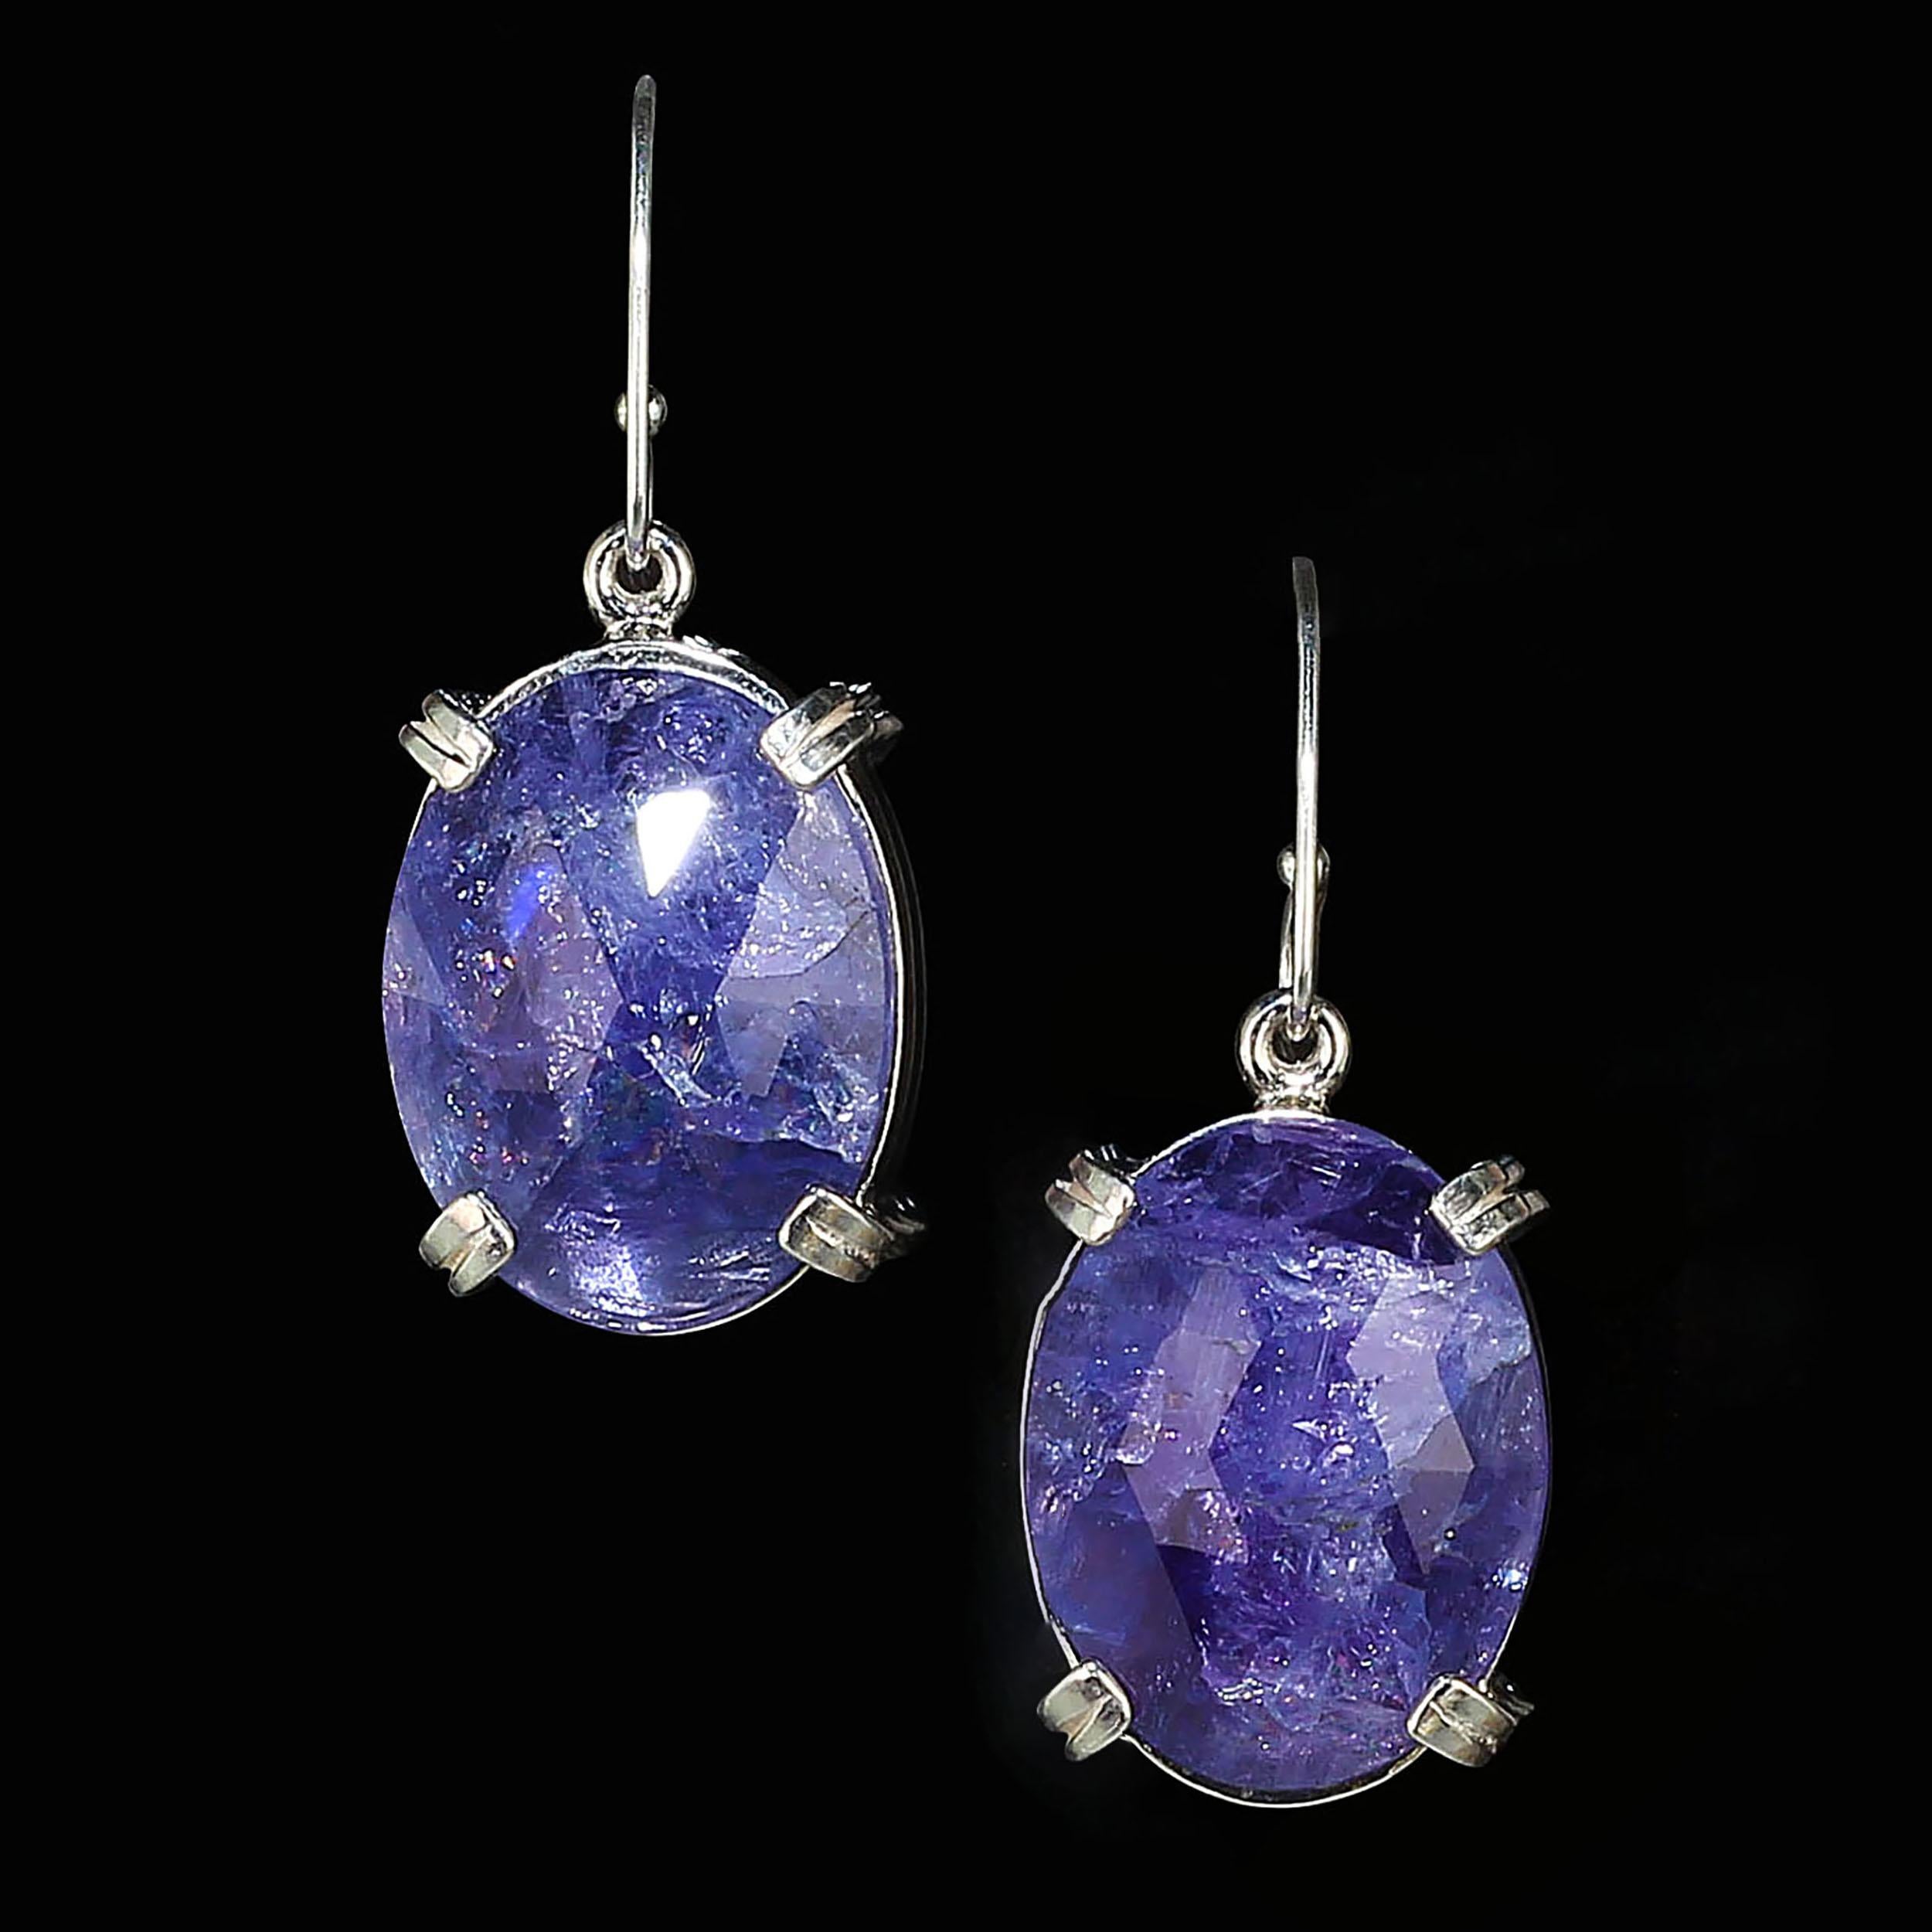 
These Tanzanite earrings are perfect for when you're teleconferencing! And, they are available for immediate shipment.
Custom made earrings of large, purple/blue oval Tanzanite tablets with faceted tables. These unique Tanzanites are a stunning